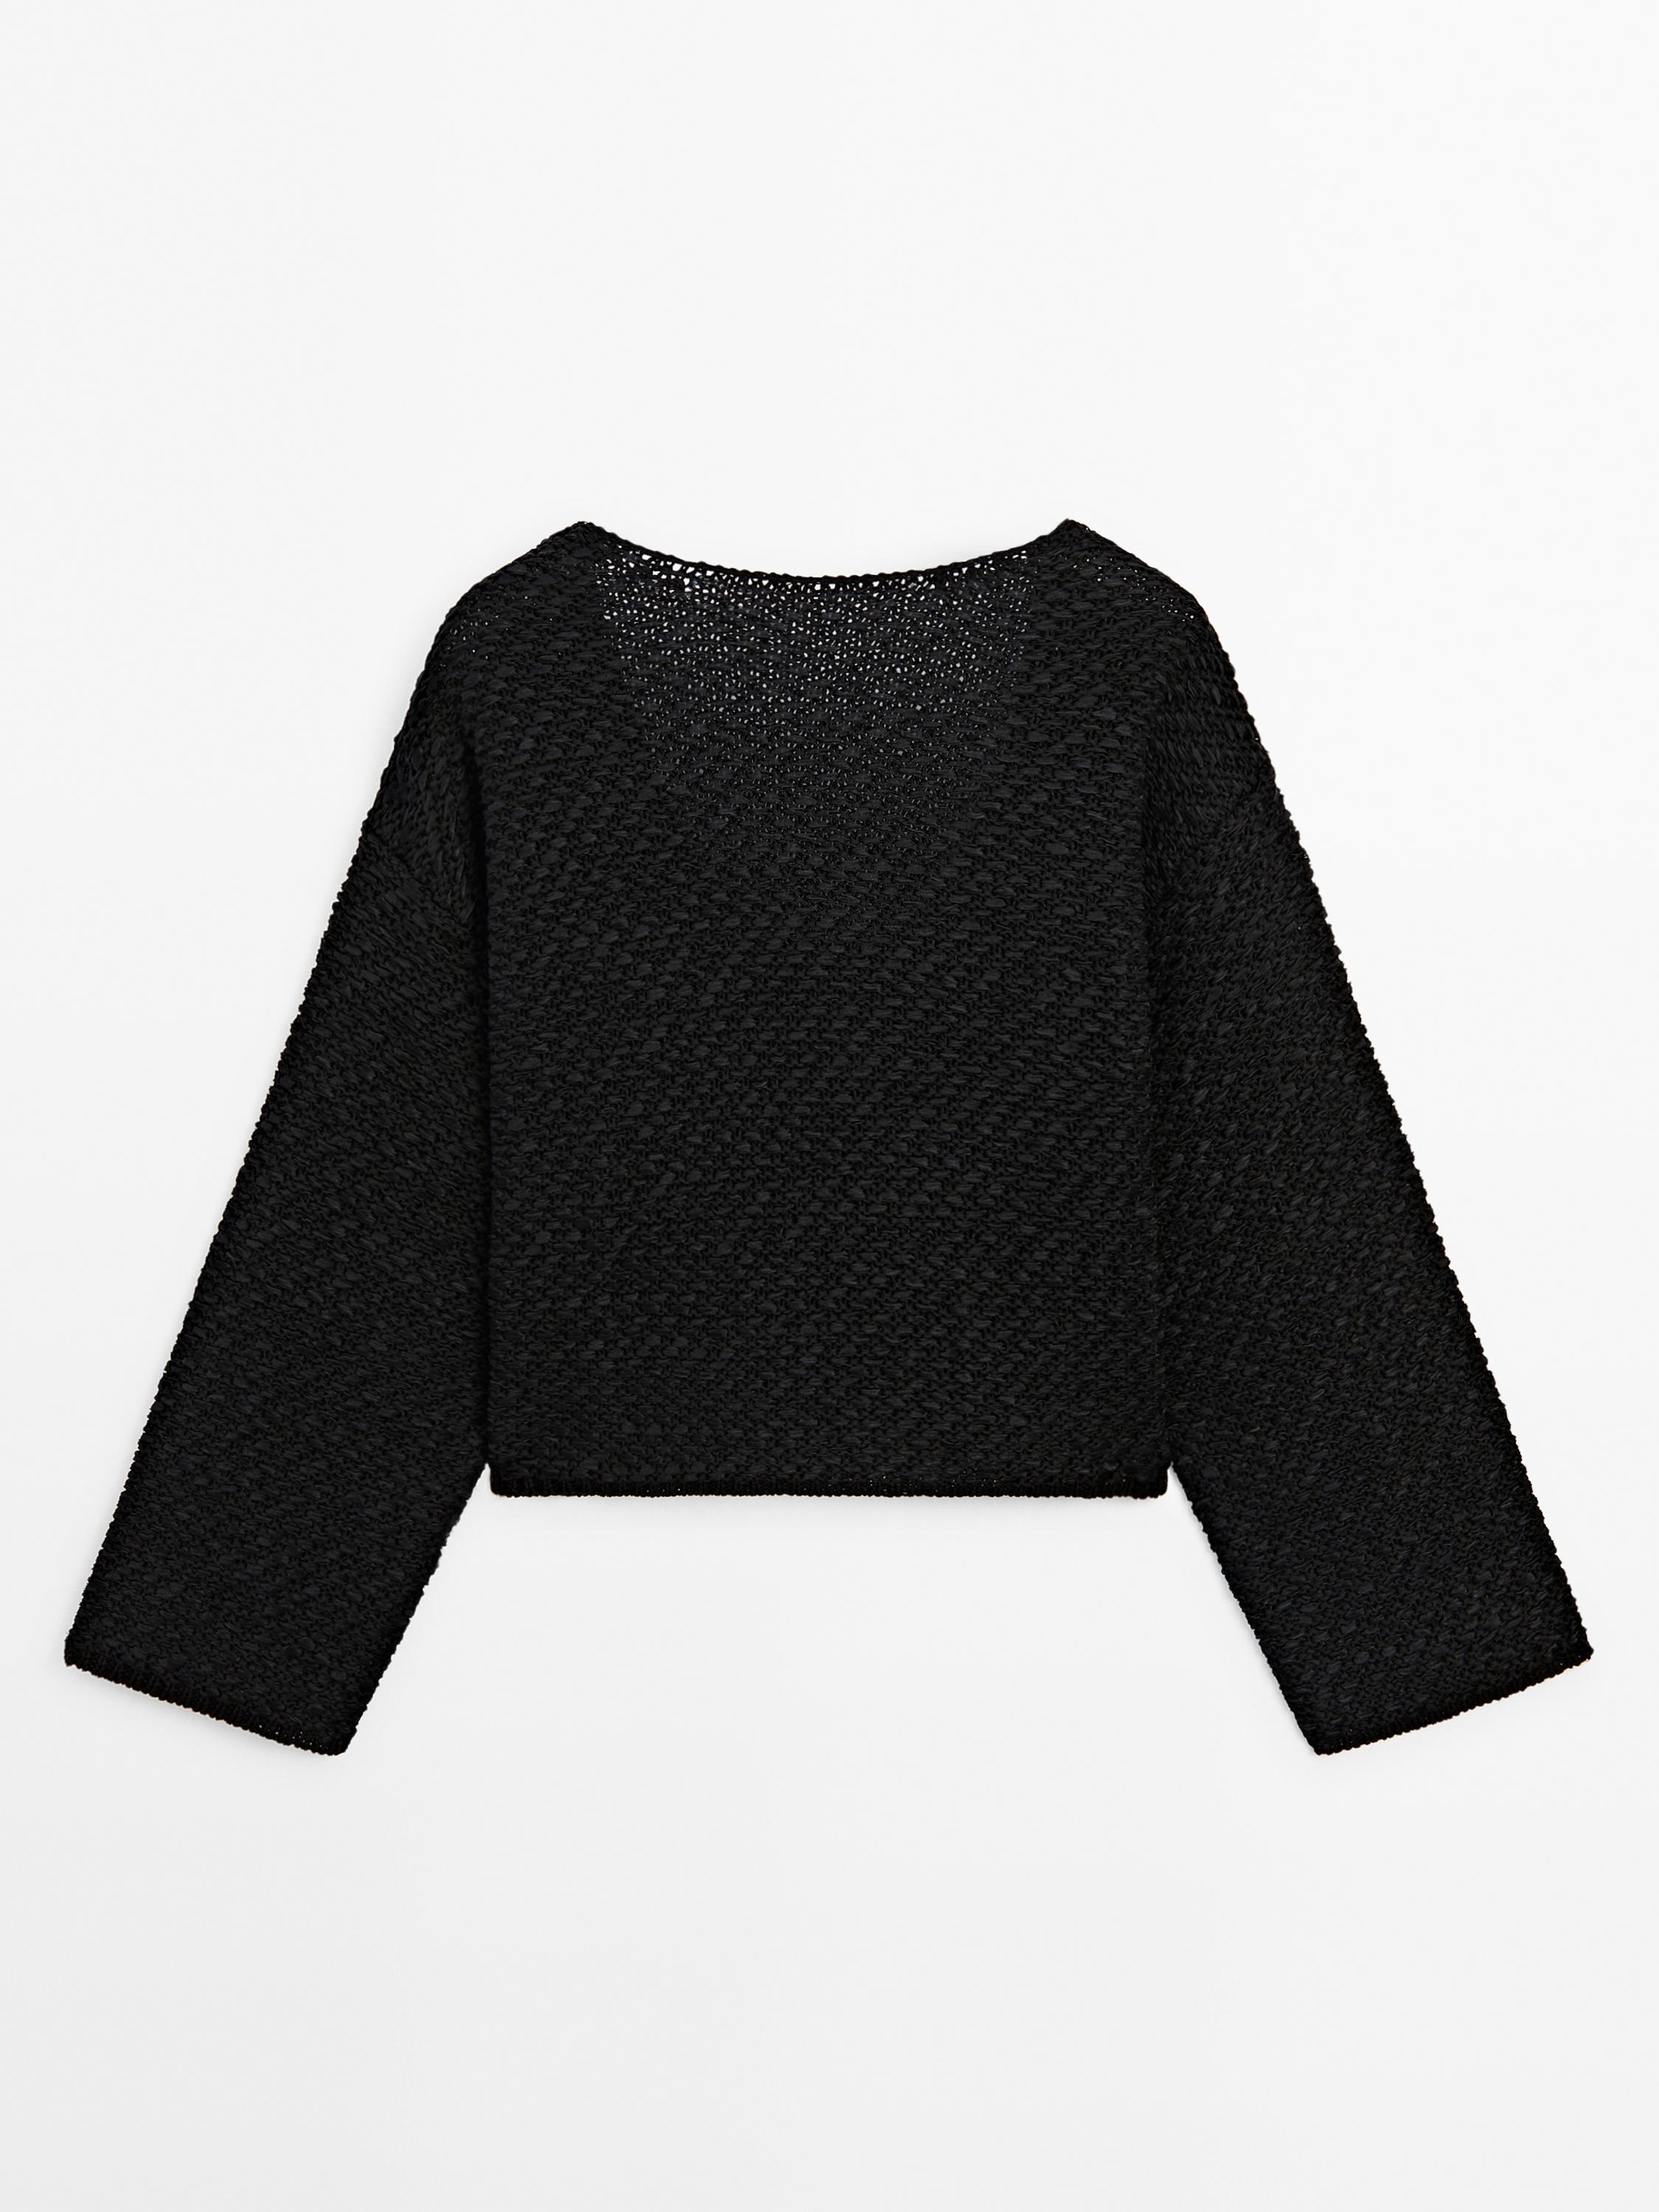 Textured knit sweater with low-cut back - Limited Edition